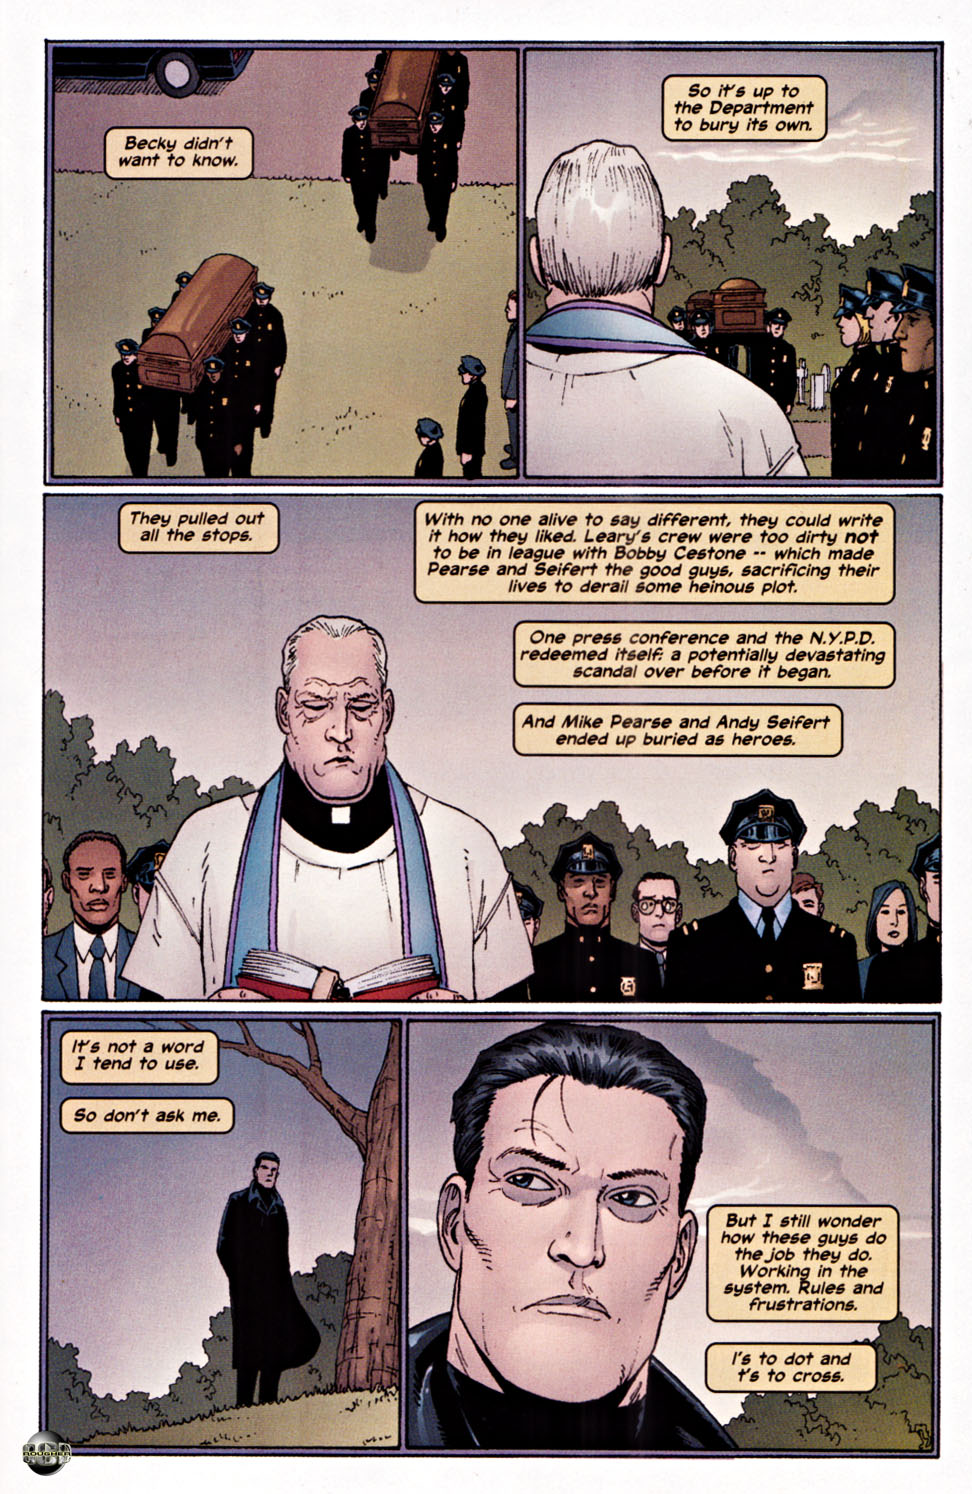 The Punisher (2001) issue 22 - Brotherhood #03 - Page 22